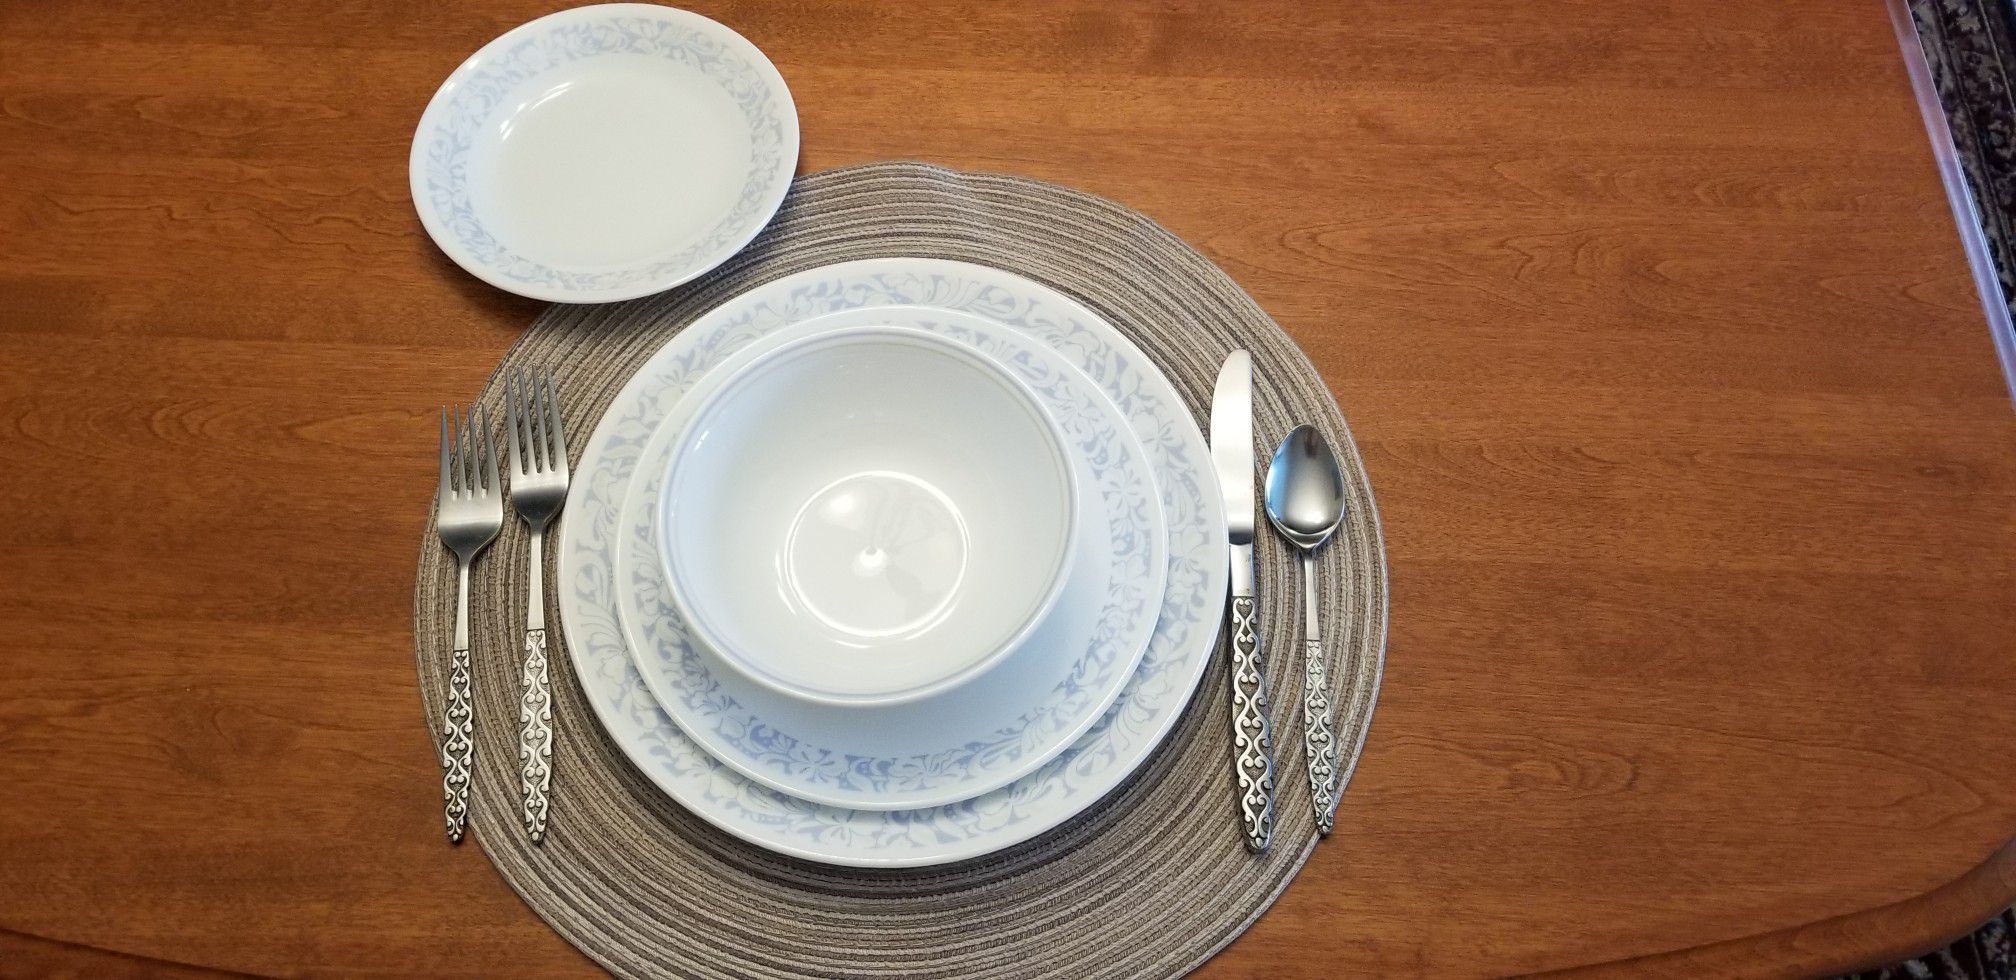 Corelle Dinnerware for 10 with silverware